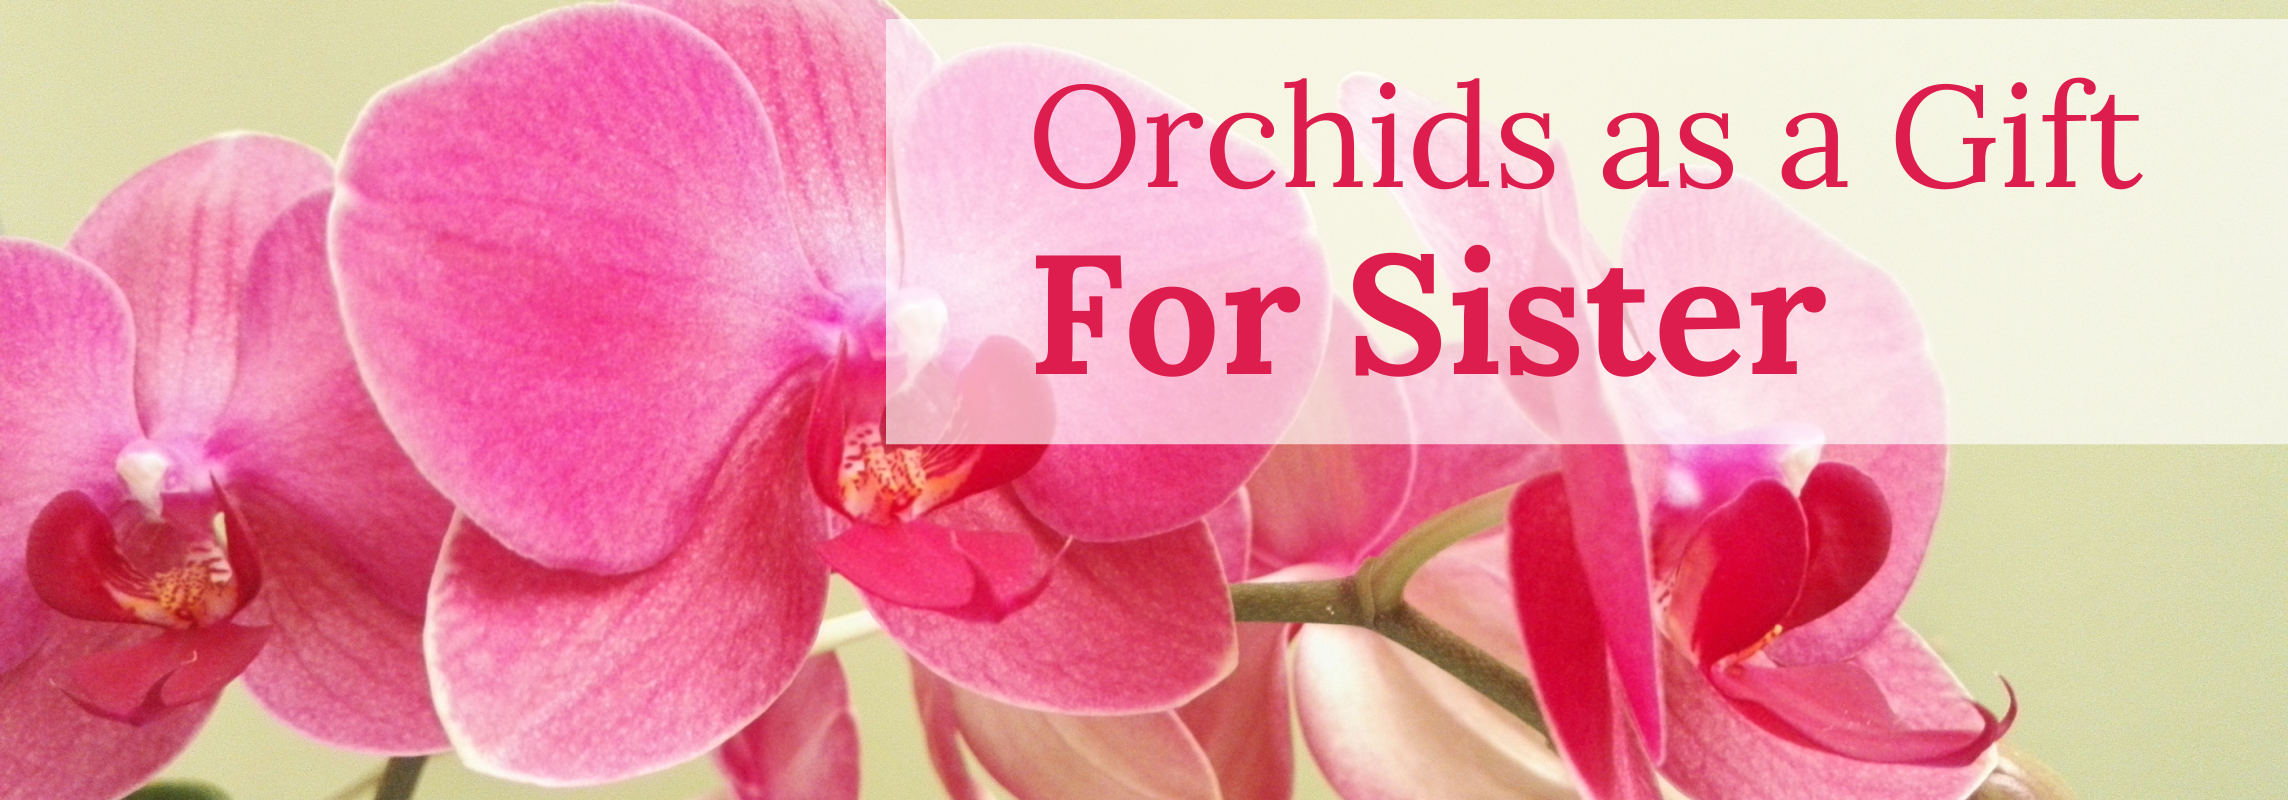 Orchids as a Gift For Sister